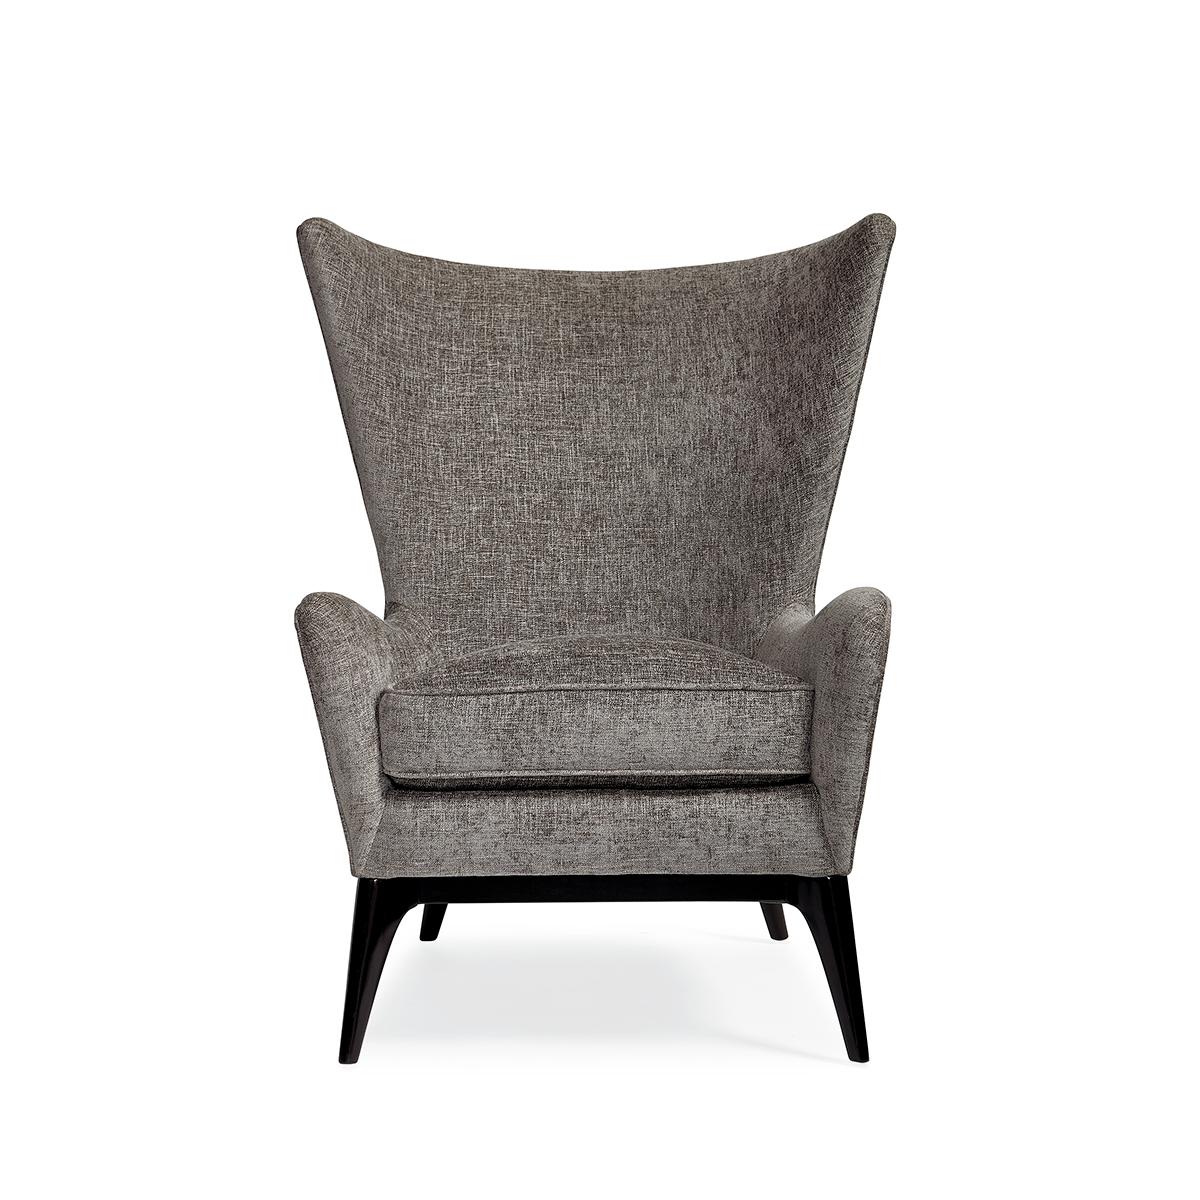 Scandinavian Mid Century armchair, this unique wing chair truly embodies Scandinavian style with the element of the wood detail across the outback finished in Almost Black. Its gracefully sloped arms and soft round back embrace you for cozy comfort